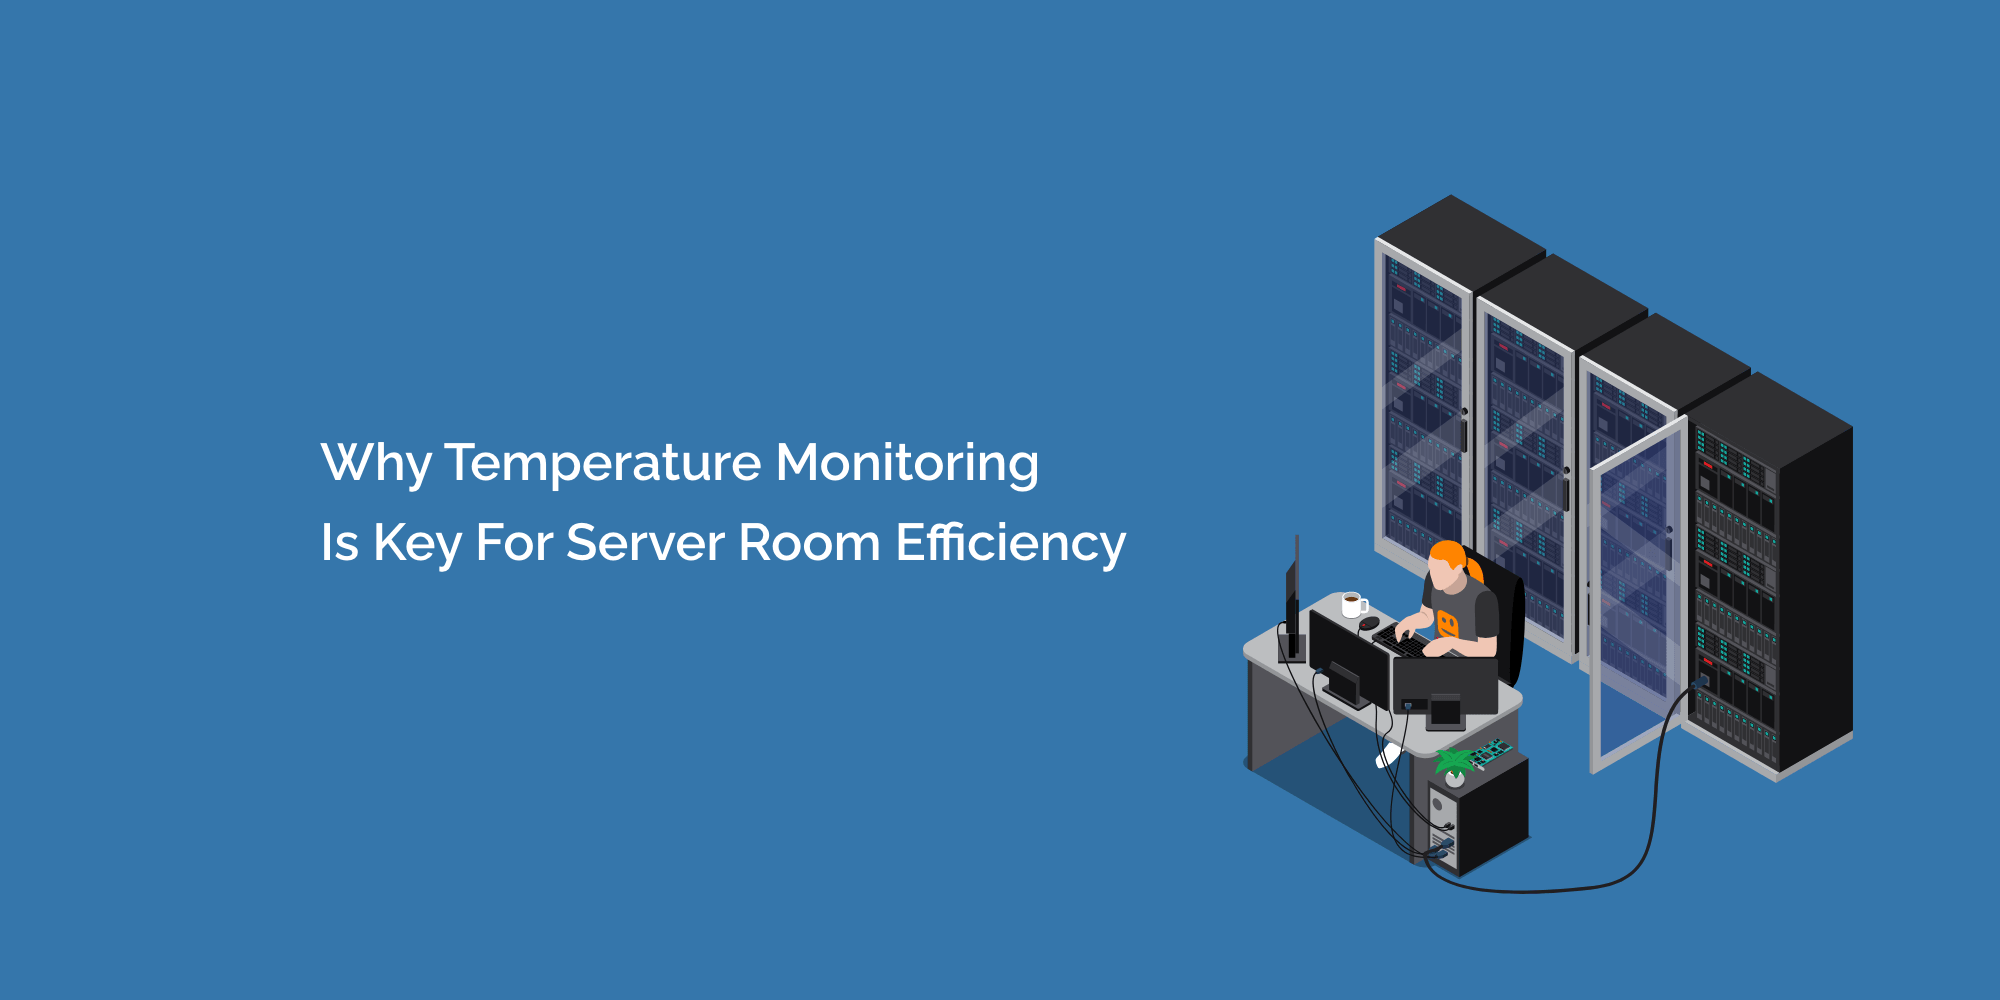 Why Temperature Monitoring is Key for Server Room Efficiency